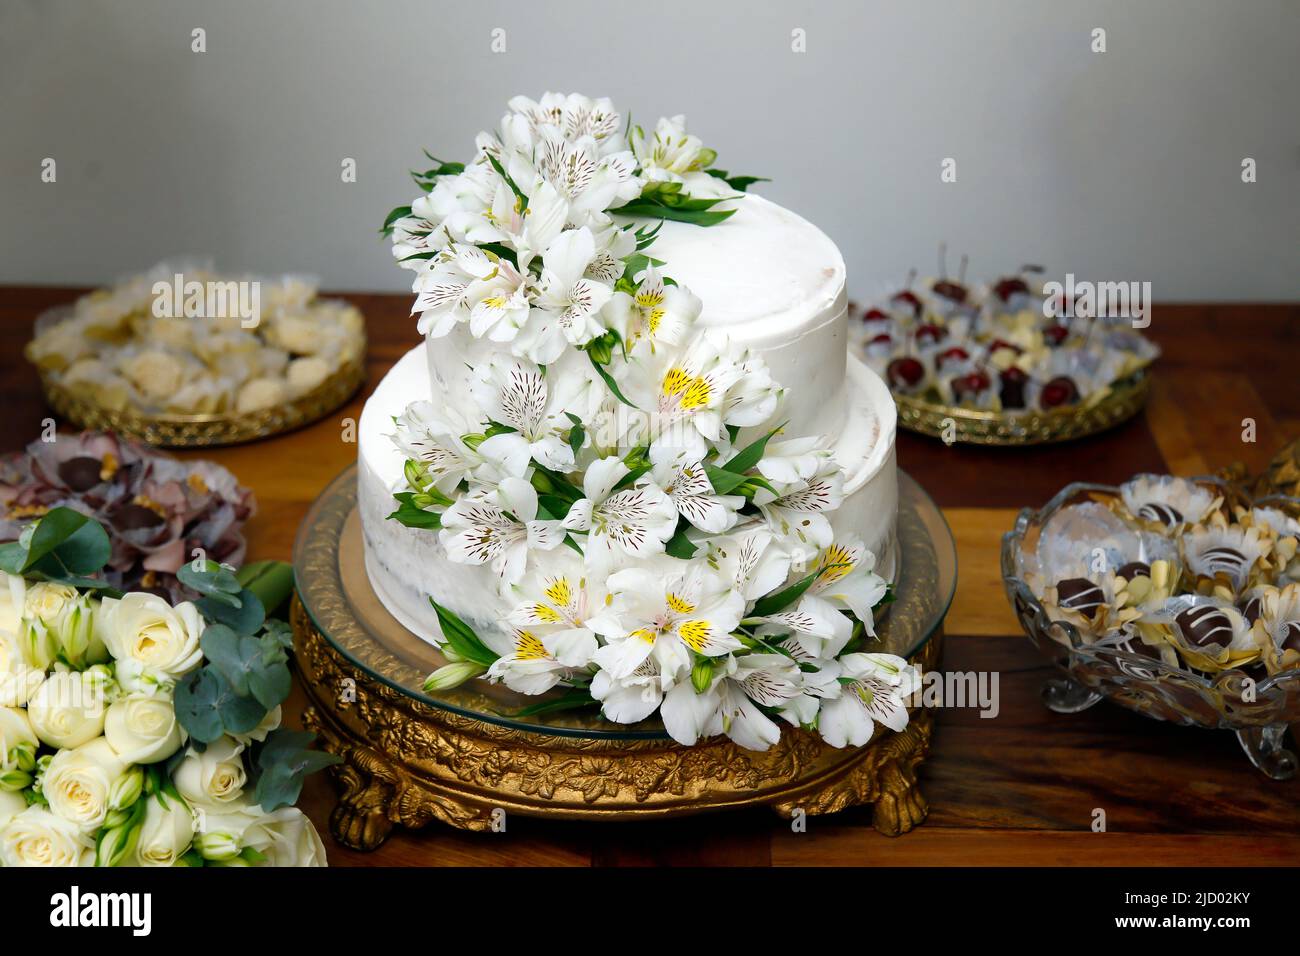 beautiful white color wedding cake in two layers decorated with astromelia flowers Stock Photo